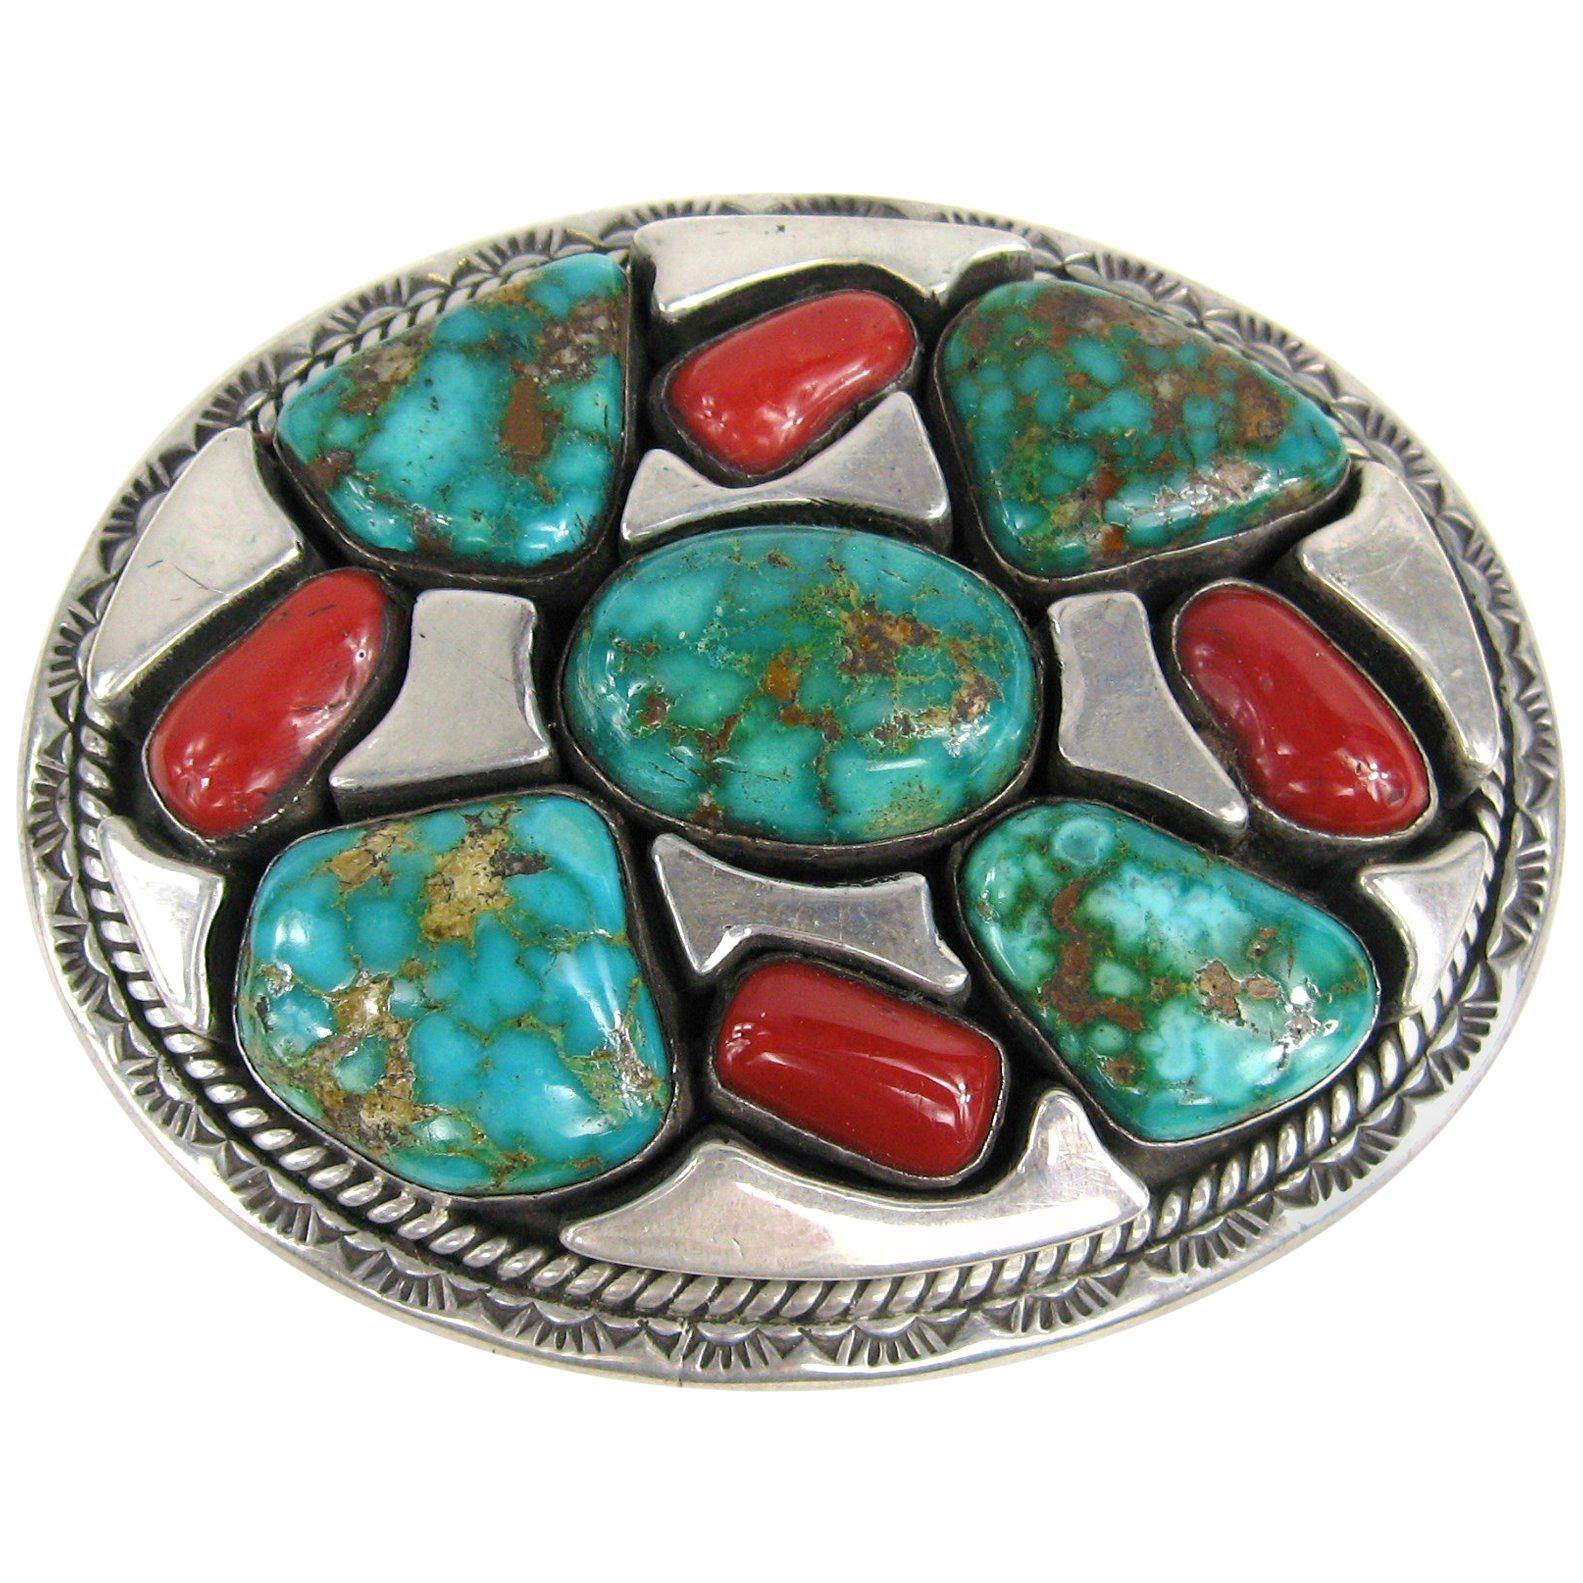  Sterling Silver Native American Turquoise and Coral Belt Buckle by Vandever